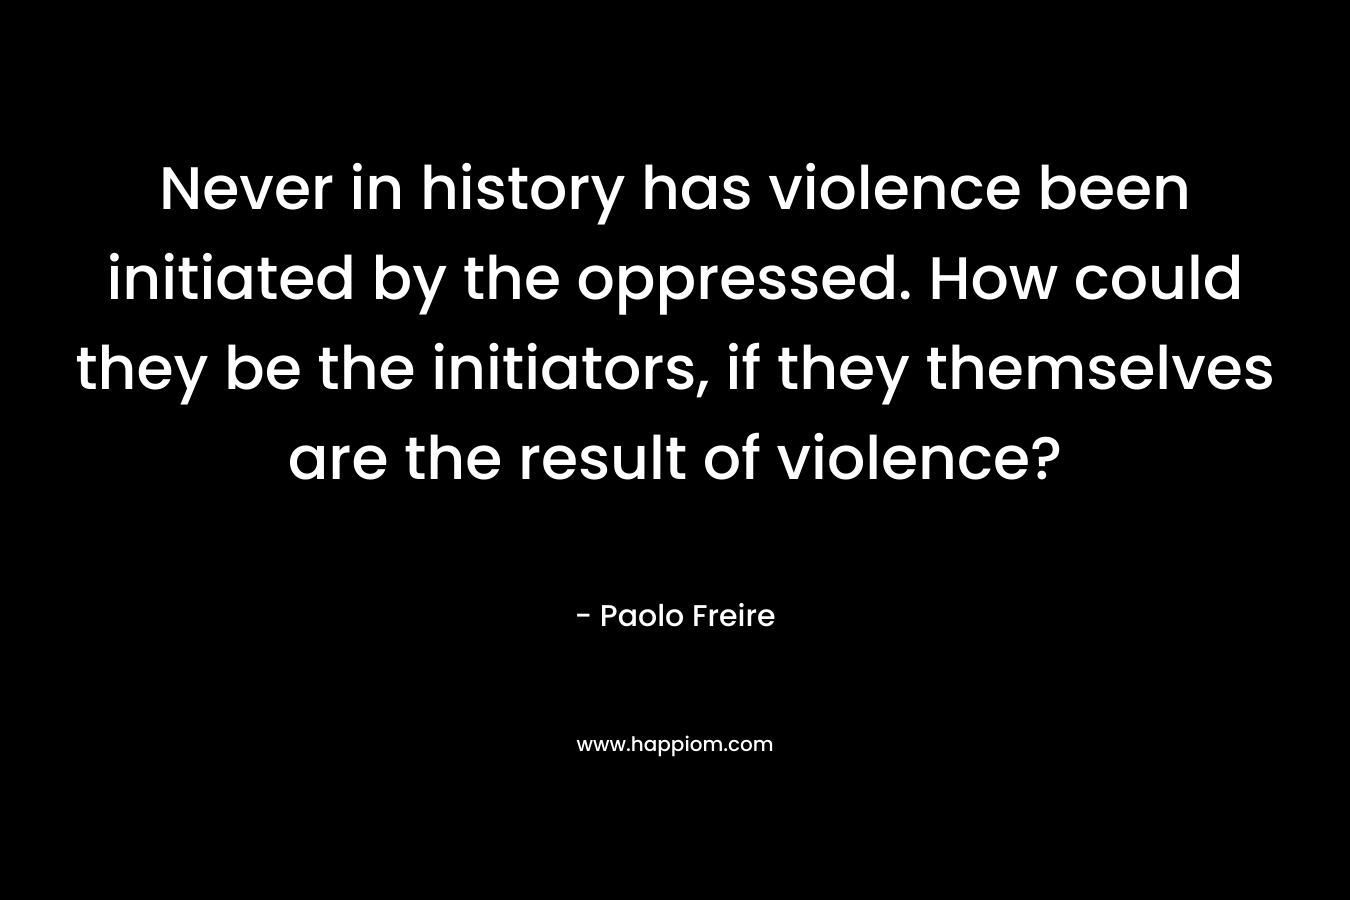 Never in history has violence been initiated by the oppressed. How could they be the initiators, if they themselves are the result of violence? – Paolo Freire